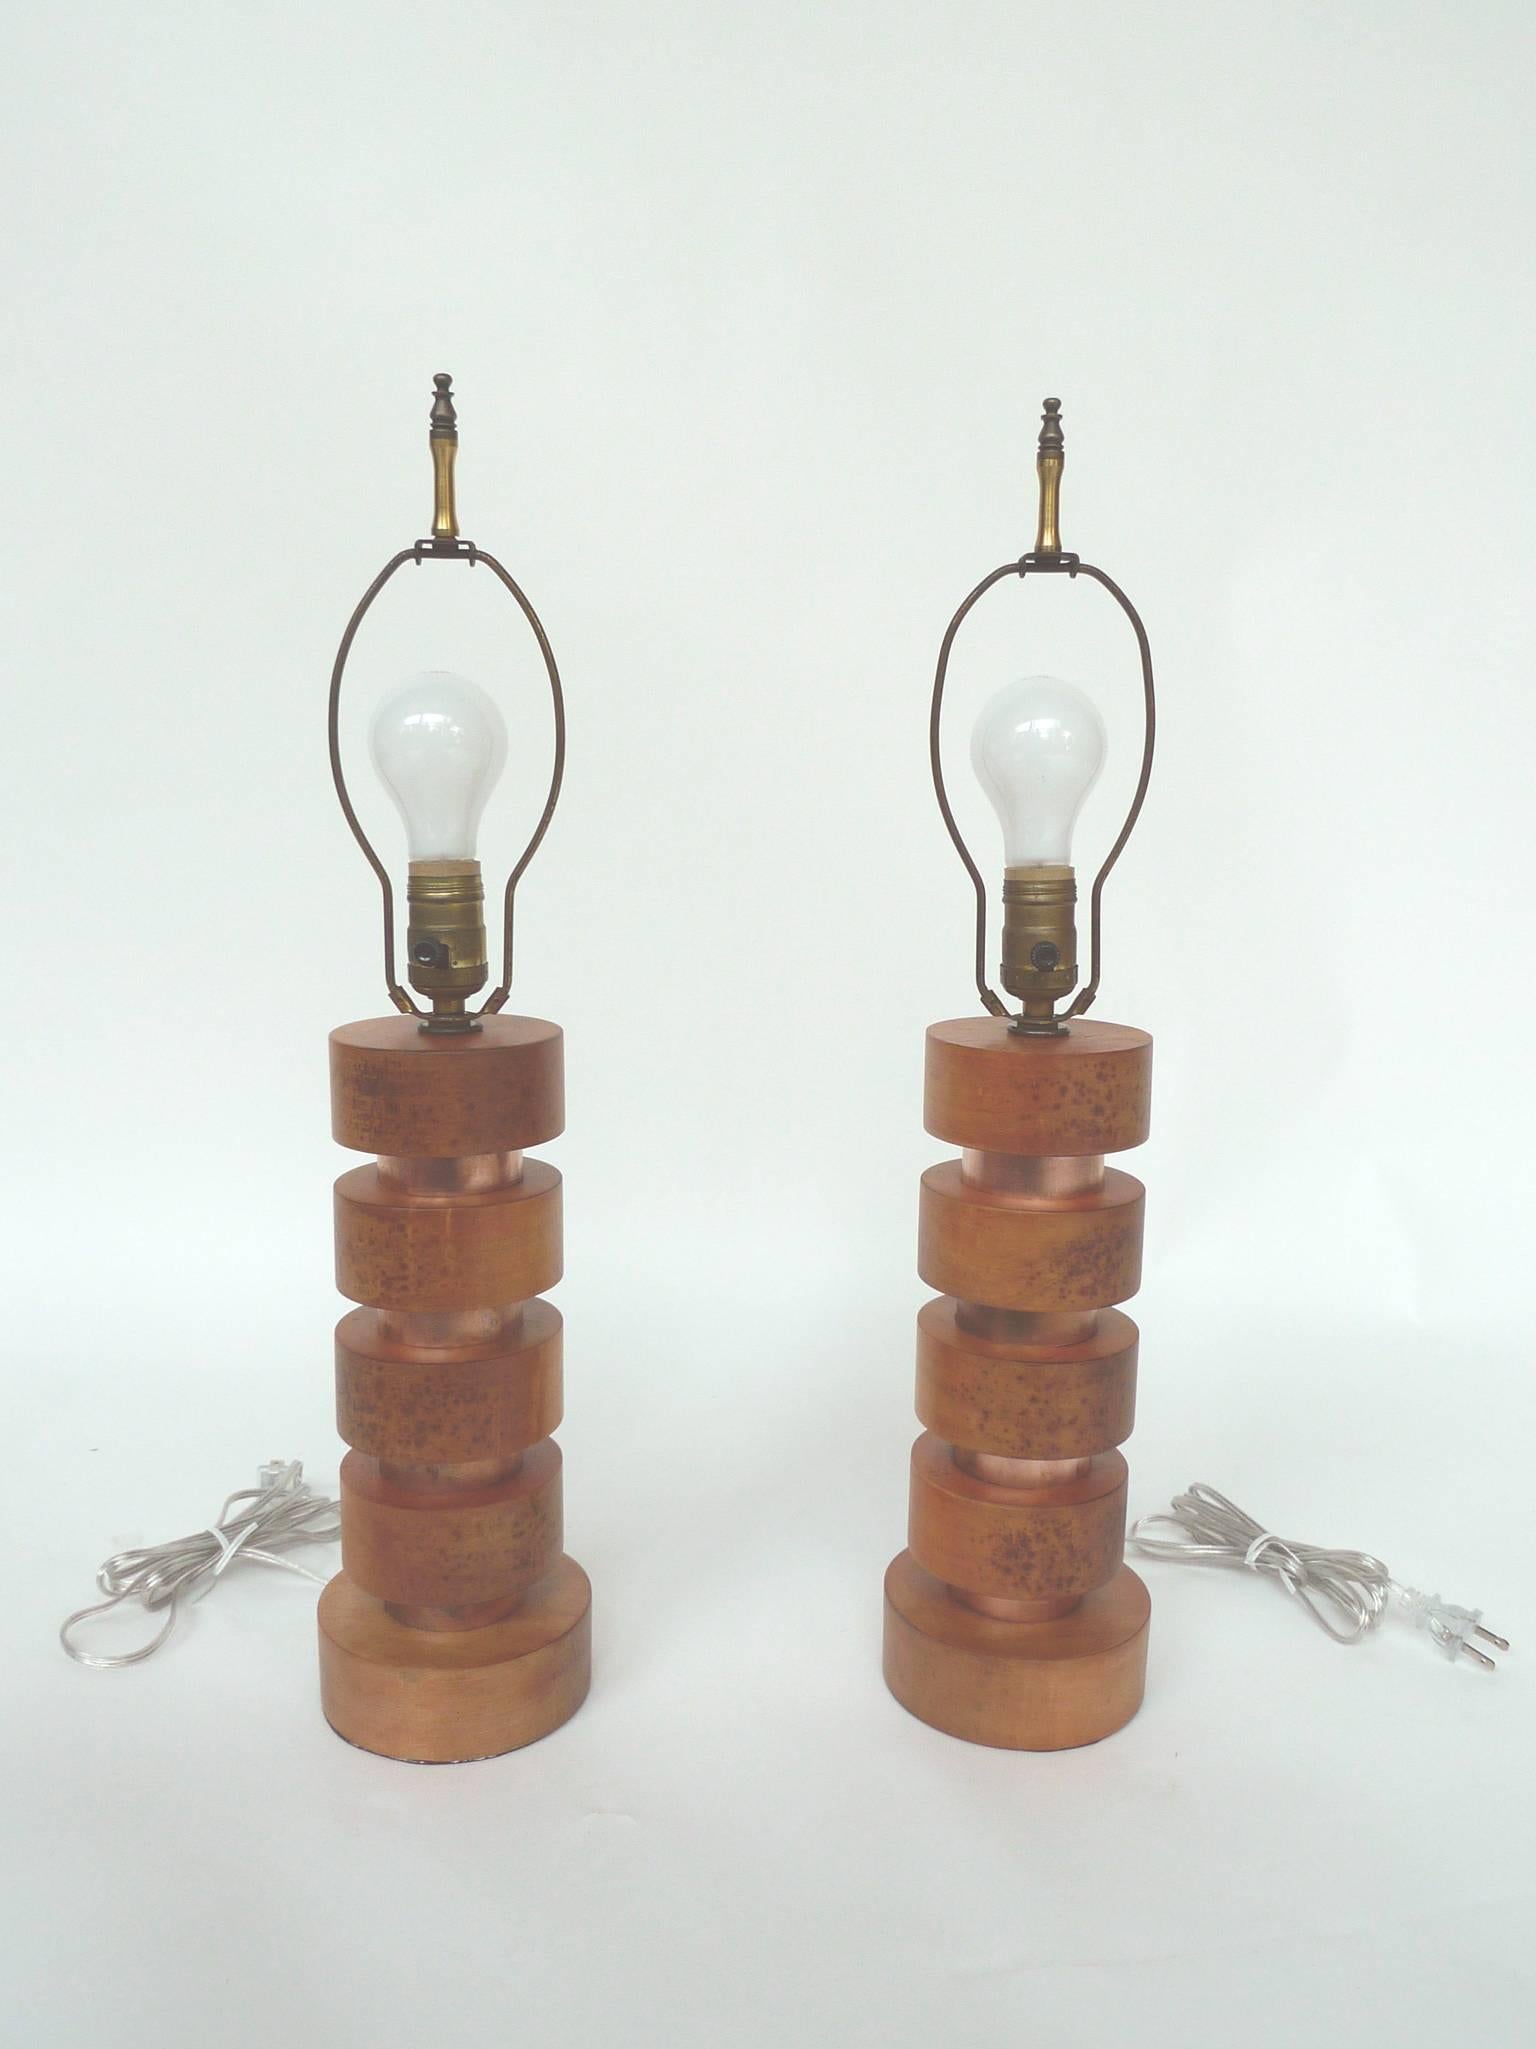 This pair of table lamps is in the style of Art Deco designer Paul Frankl. The wooden discs are newly refinished in rose and copper. The lamps have brass hardware and are rewired with single-bulb sockets. They are paired with new parchment shades.